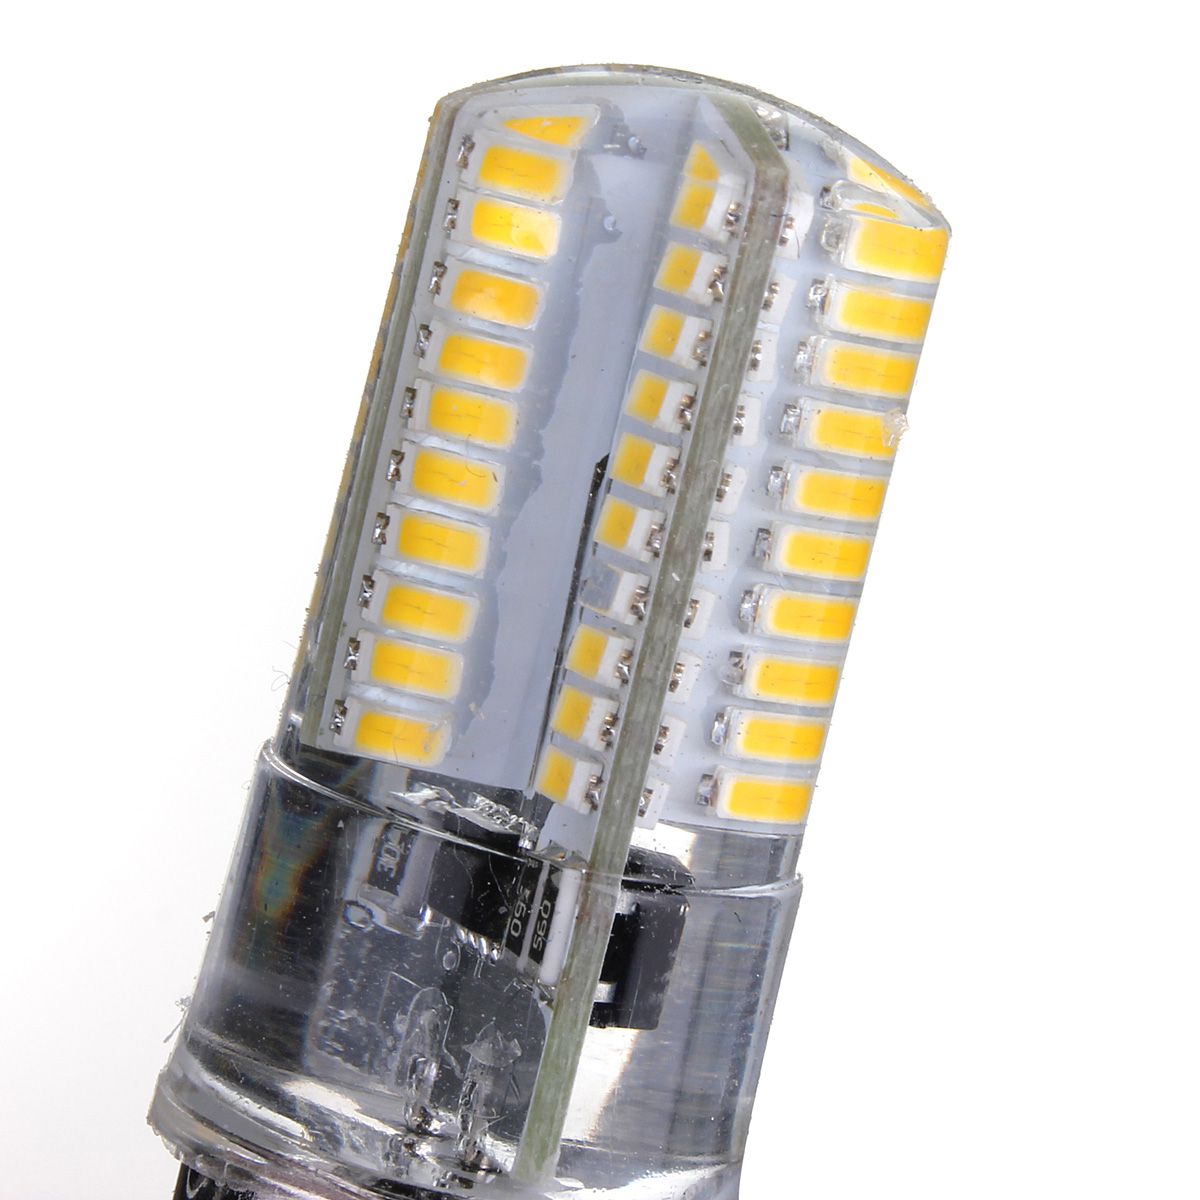 110-120V-3W-80LED-3014-SMD-E12-LED-Dimmable-Silicone-Crystal-Bulb-964373-9